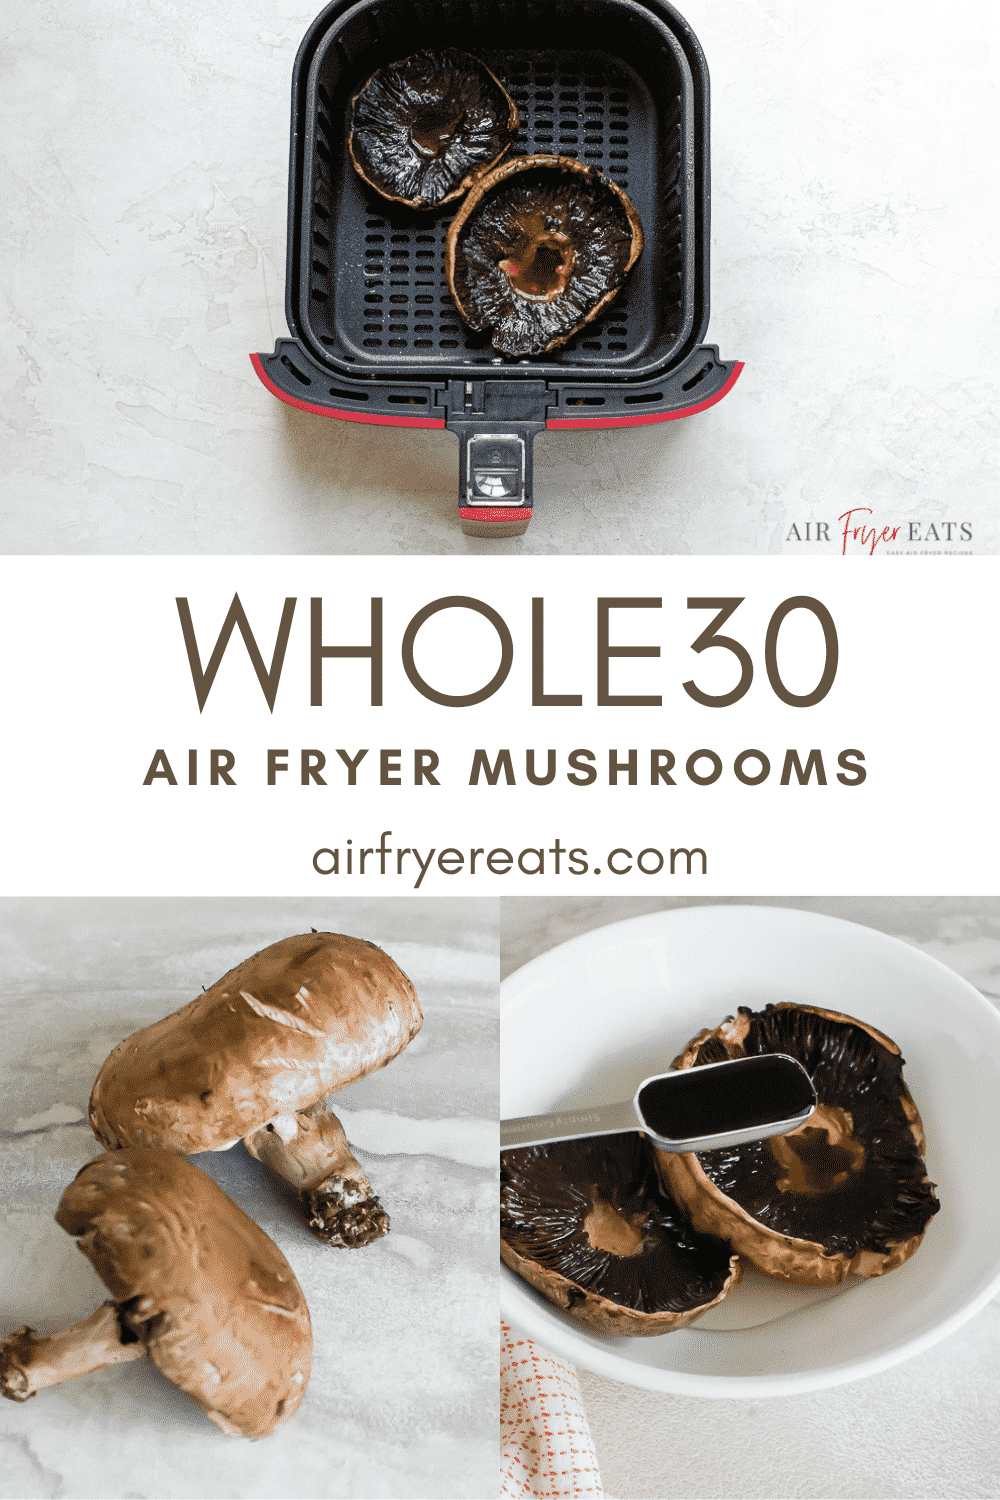 These Air Fryer Mushrooms are a great meatless Monday dish with tons of flavor and protein! Slice and serve for a main dish in less than 20 minutes! #airfryermushrooms #portobellomushrooms #mushroomcaps via @vegetarianmamma